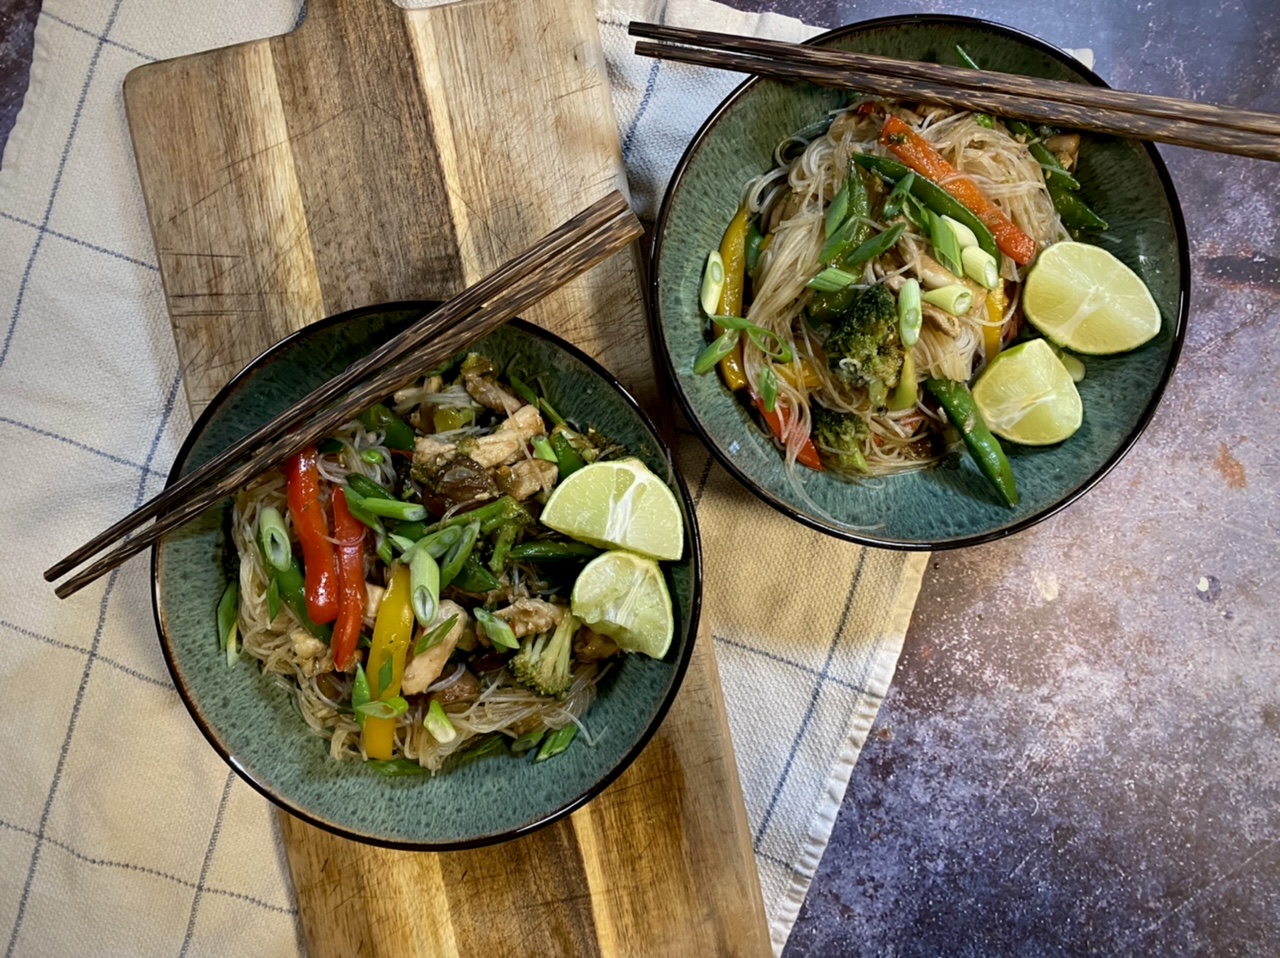 Chicken stir fry in bowls with chopsticks on top of a wooden cutting board